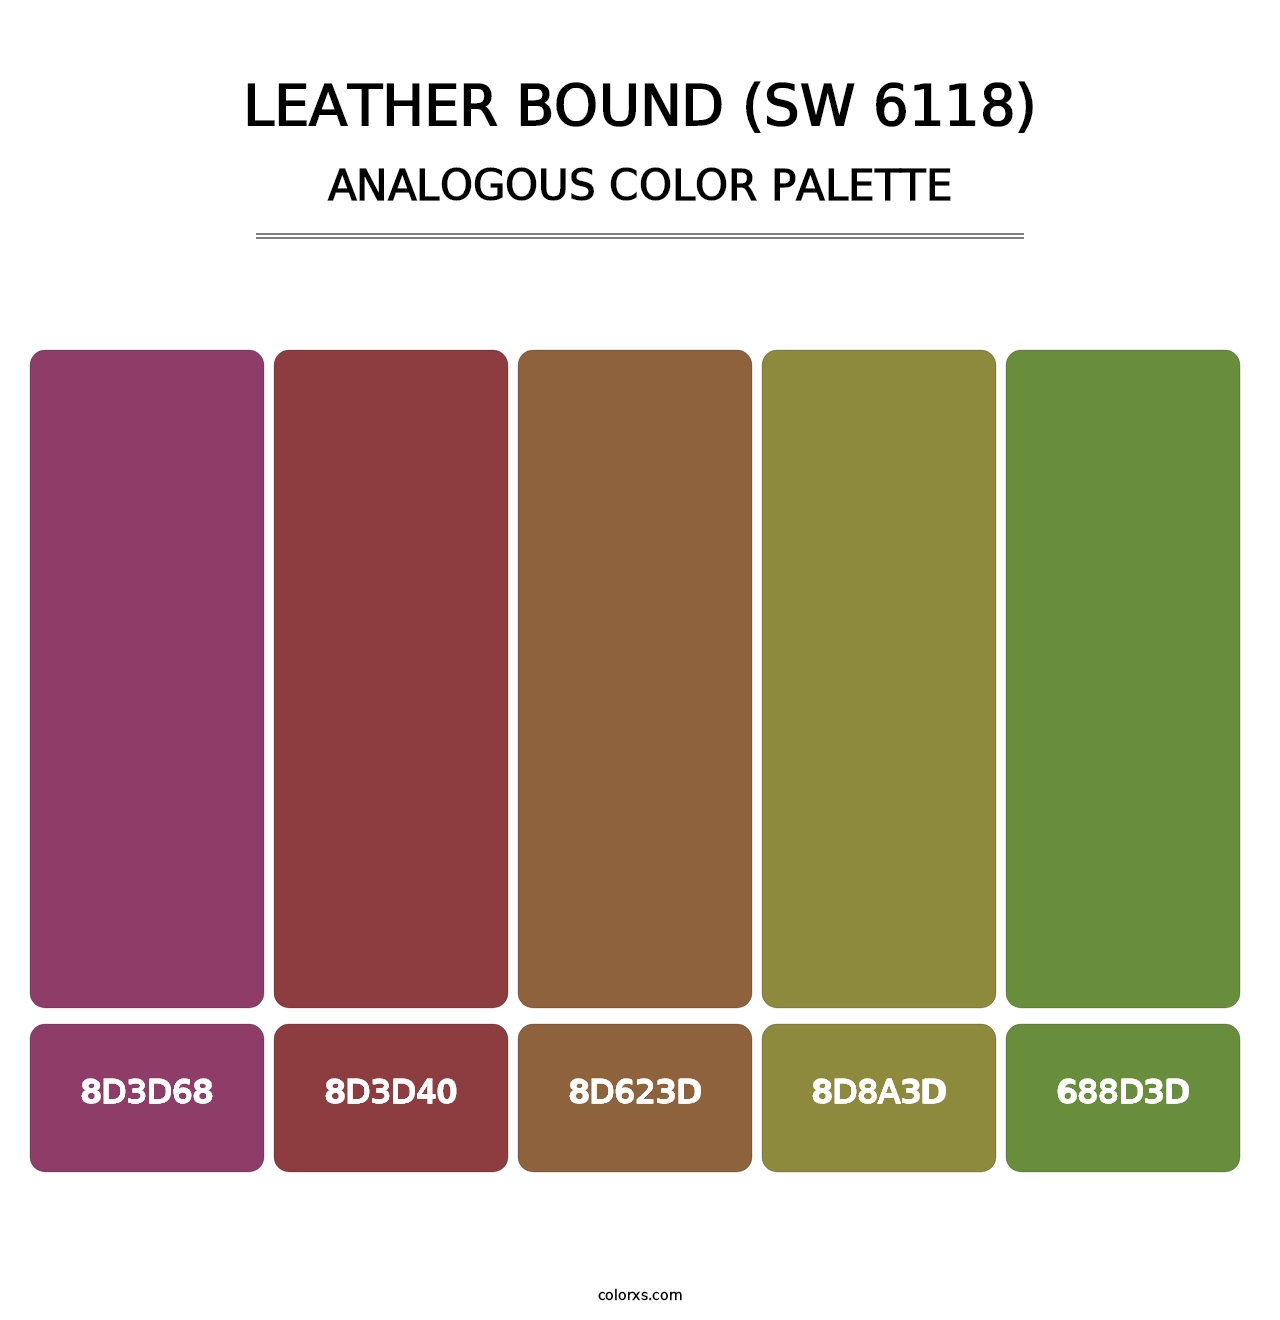 Leather Bound (SW 6118) - Analogous Color Palette